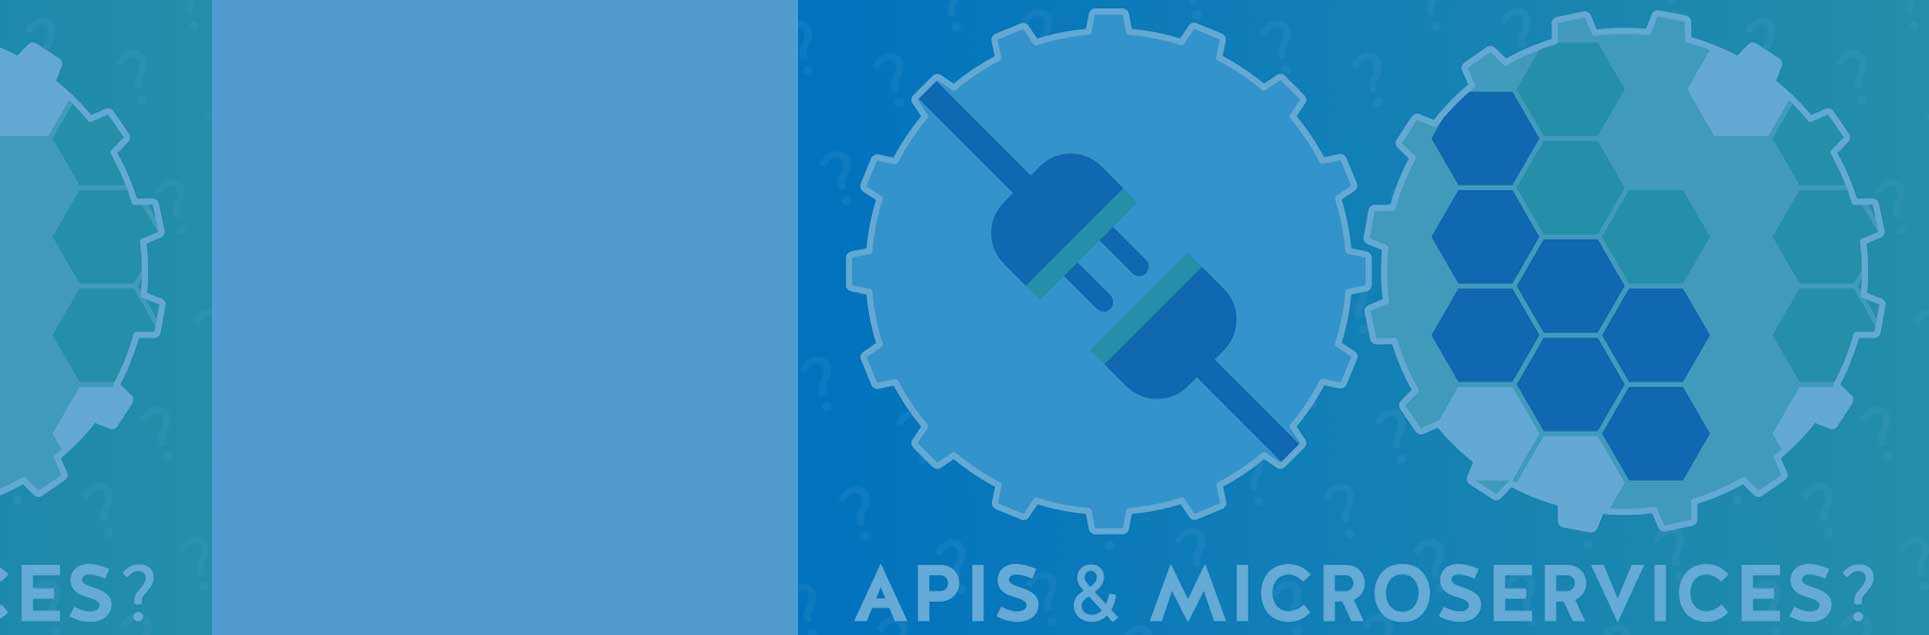 Product Microservices and API Development Services | Modernaize App with Microservices | Princeton IT Services image